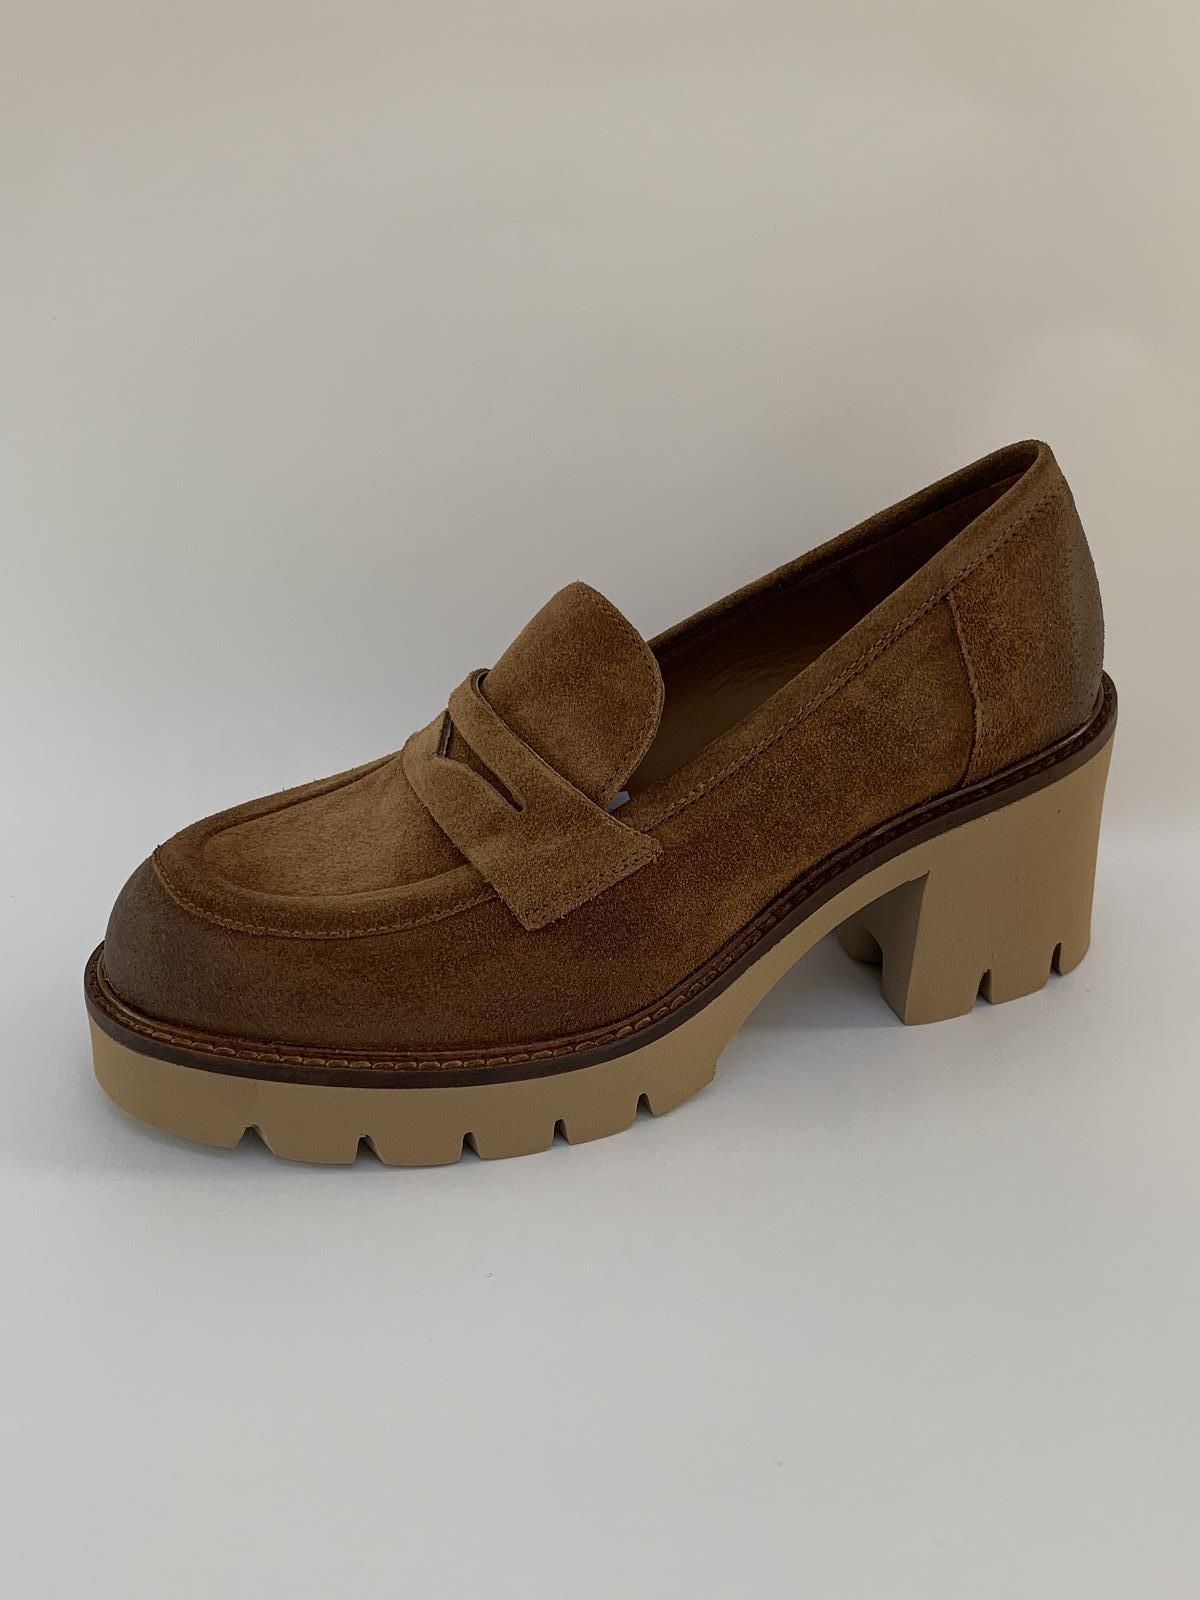 Mat:20 Moccasin Roest dames (Moccassin Roest - 8701) - Schoenen Luca